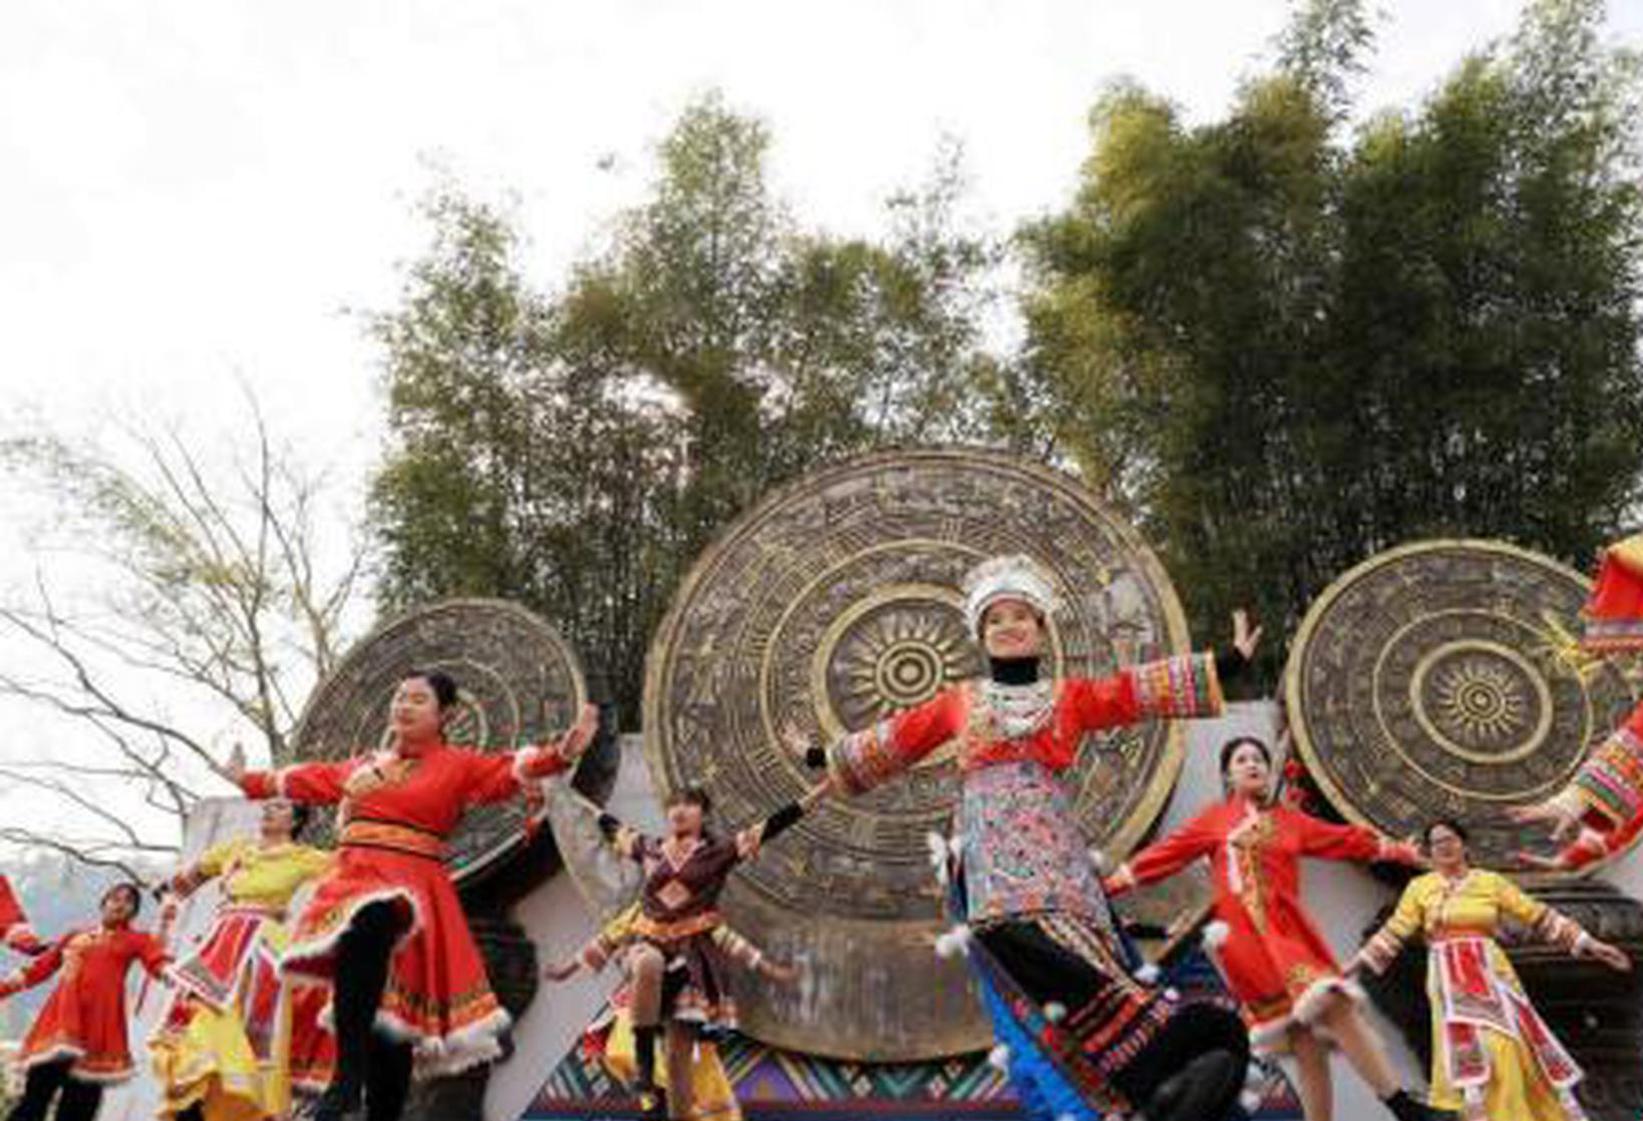 China improves ethnic, religious work over past 5 years: report